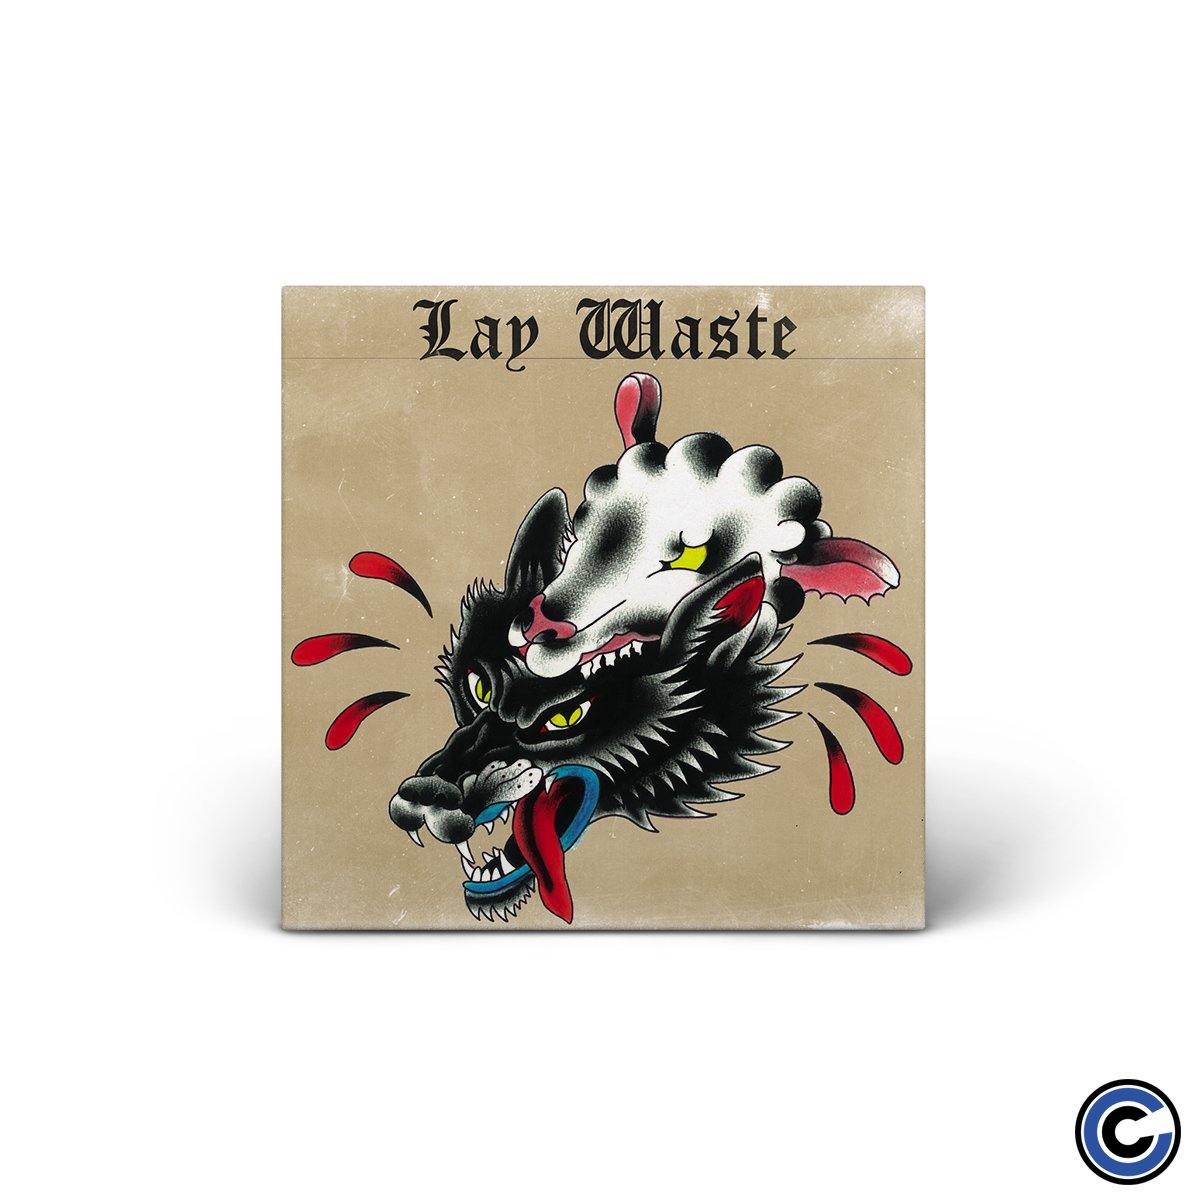 Buy – Lay Waste "Lay Waste" 7" – Band & Music Merch – Cold Cuts Merch